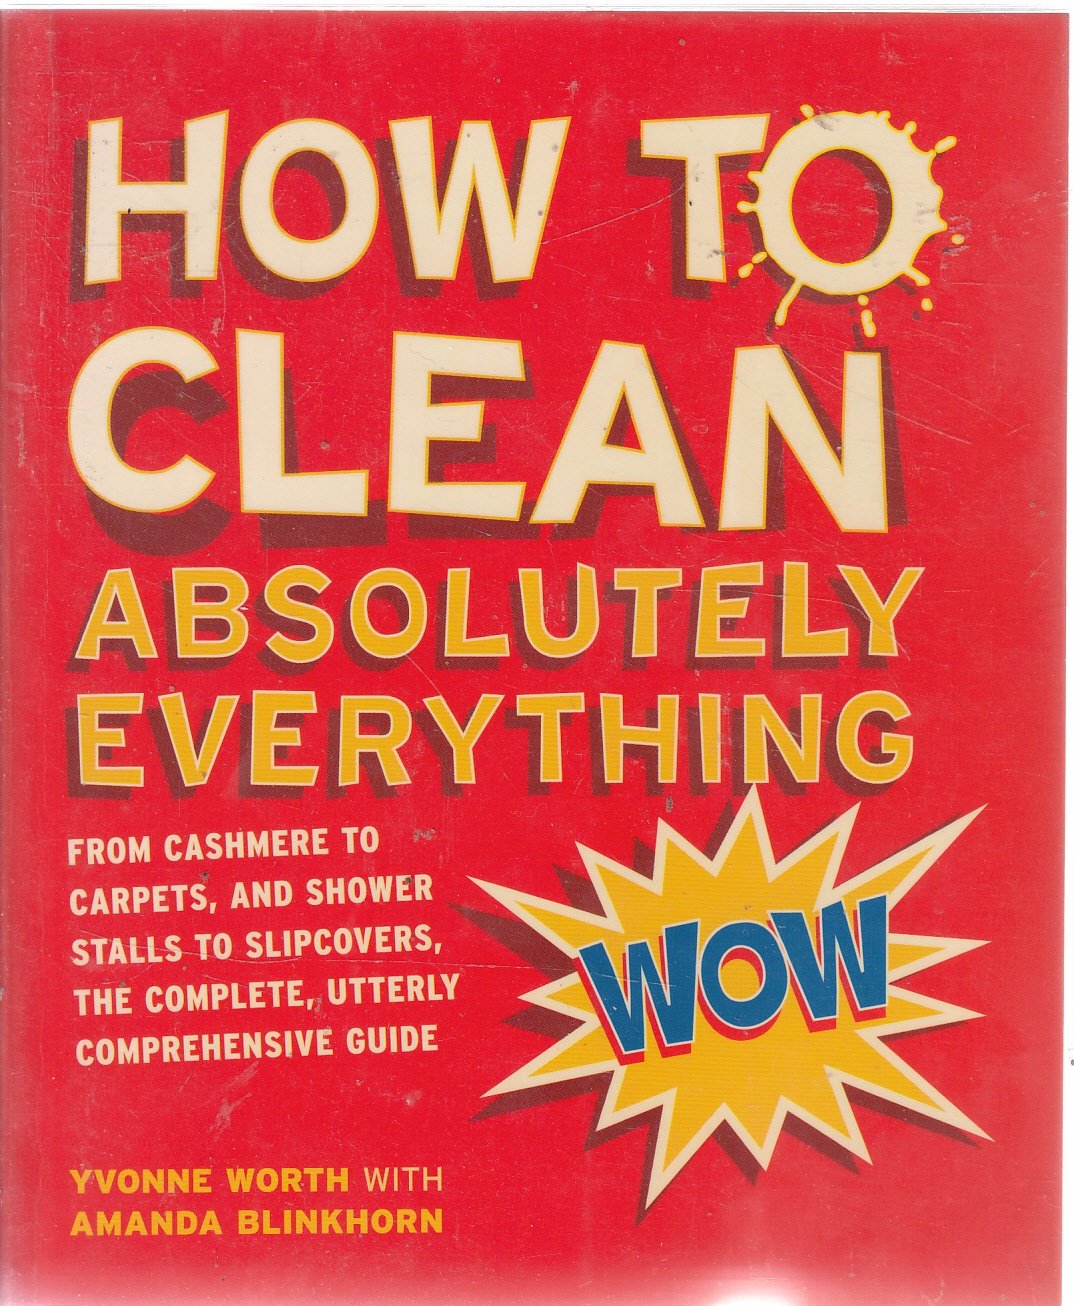 How to clean absolutely everything